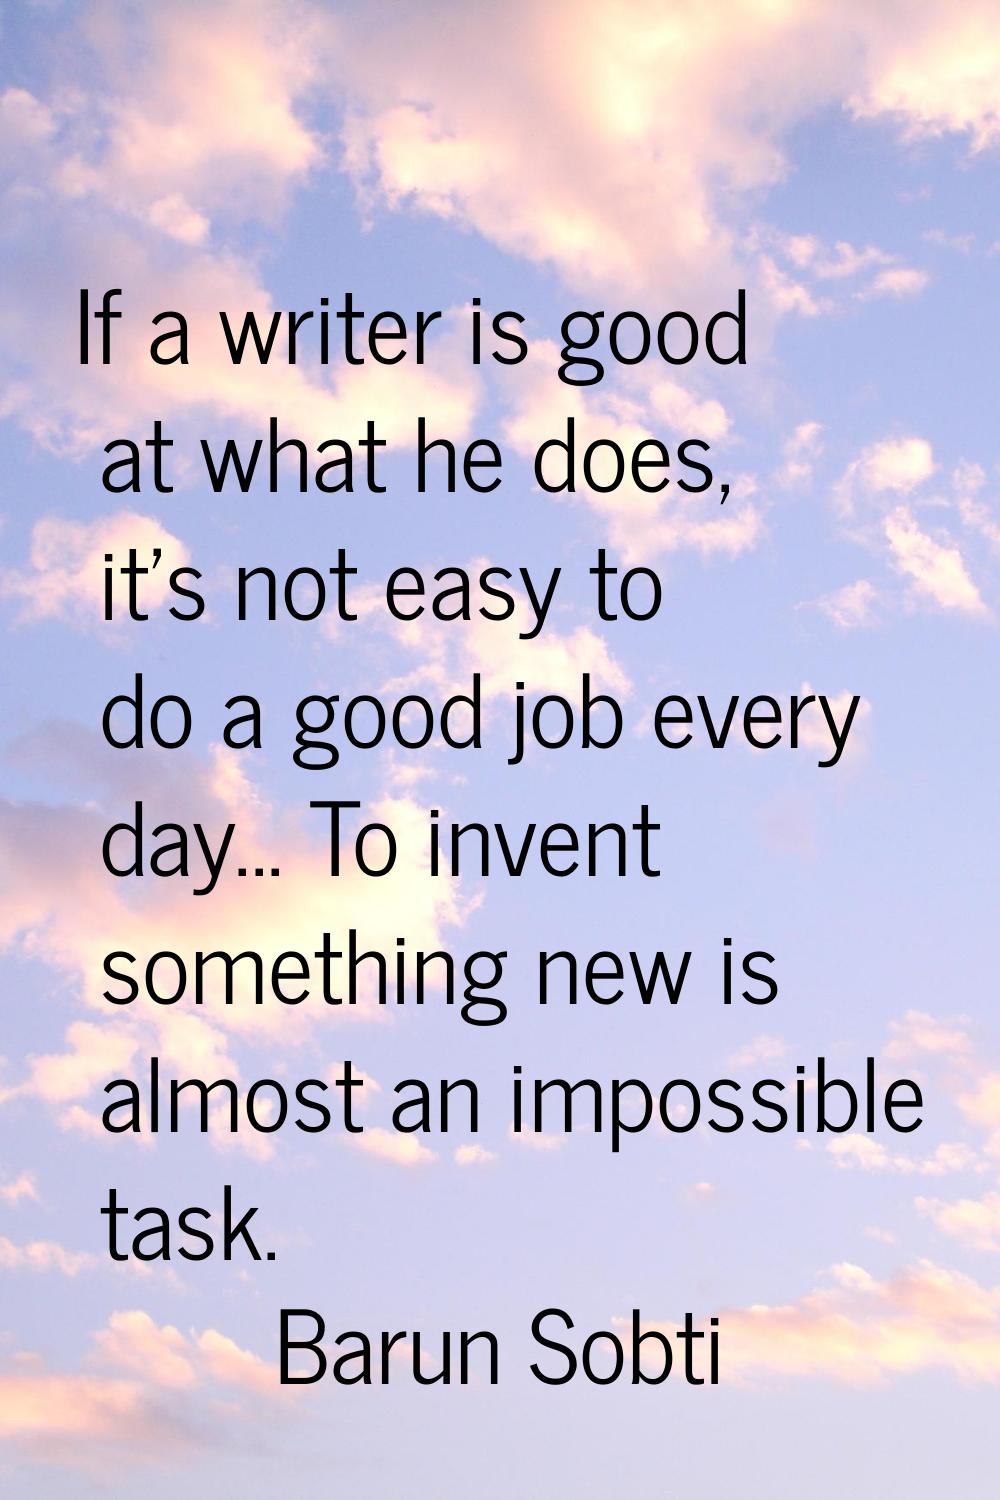 If a writer is good at what he does, it's not easy to do a good job every day... To invent somethin